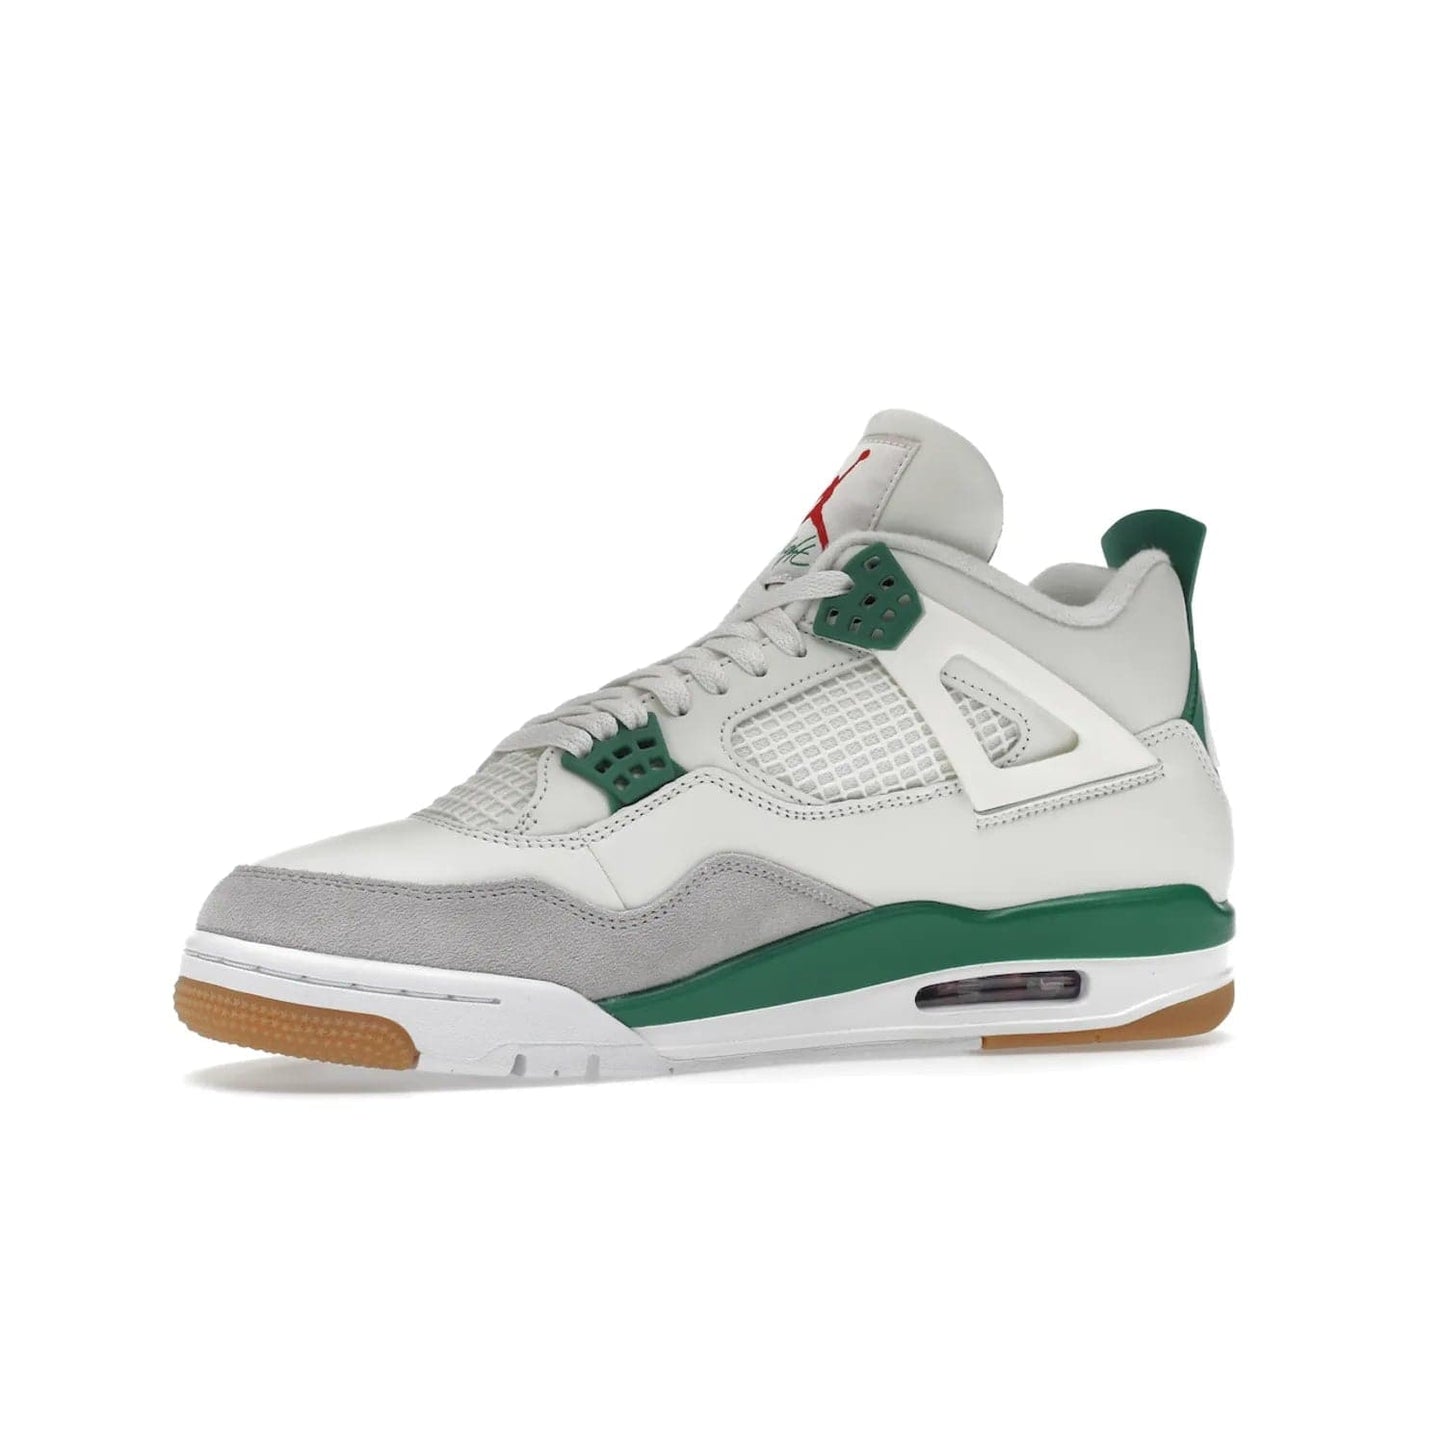 Jordan 4 Retro SB Pine Green - Image 17 - Only at www.BallersClubKickz.com - A white leather upper combined with a Neutral Grey suede mudguard gives this limited Air Jordan 4 Retro SB Pine Green sneaker its unmistakable style. Released March 20, 2023, the Jordan 4 Retro SB features a white and Pine Green midsole plus a red air unit with a gum outsole for grip. The perfect blend of Nike SB skateboarding and Jordan 4 classic design.